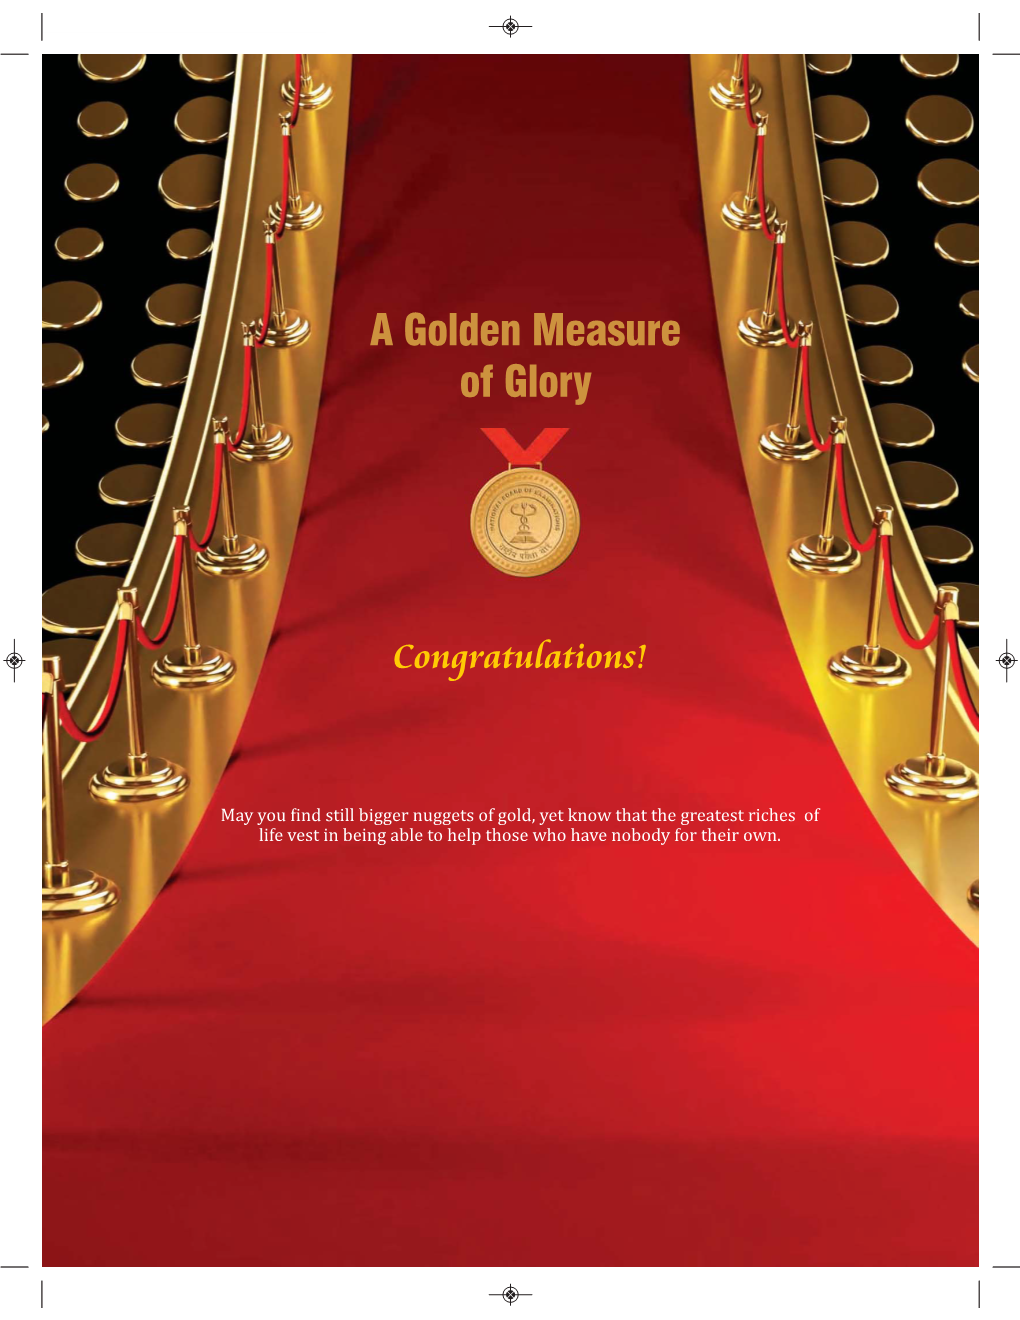 A Golden Measure of Glory